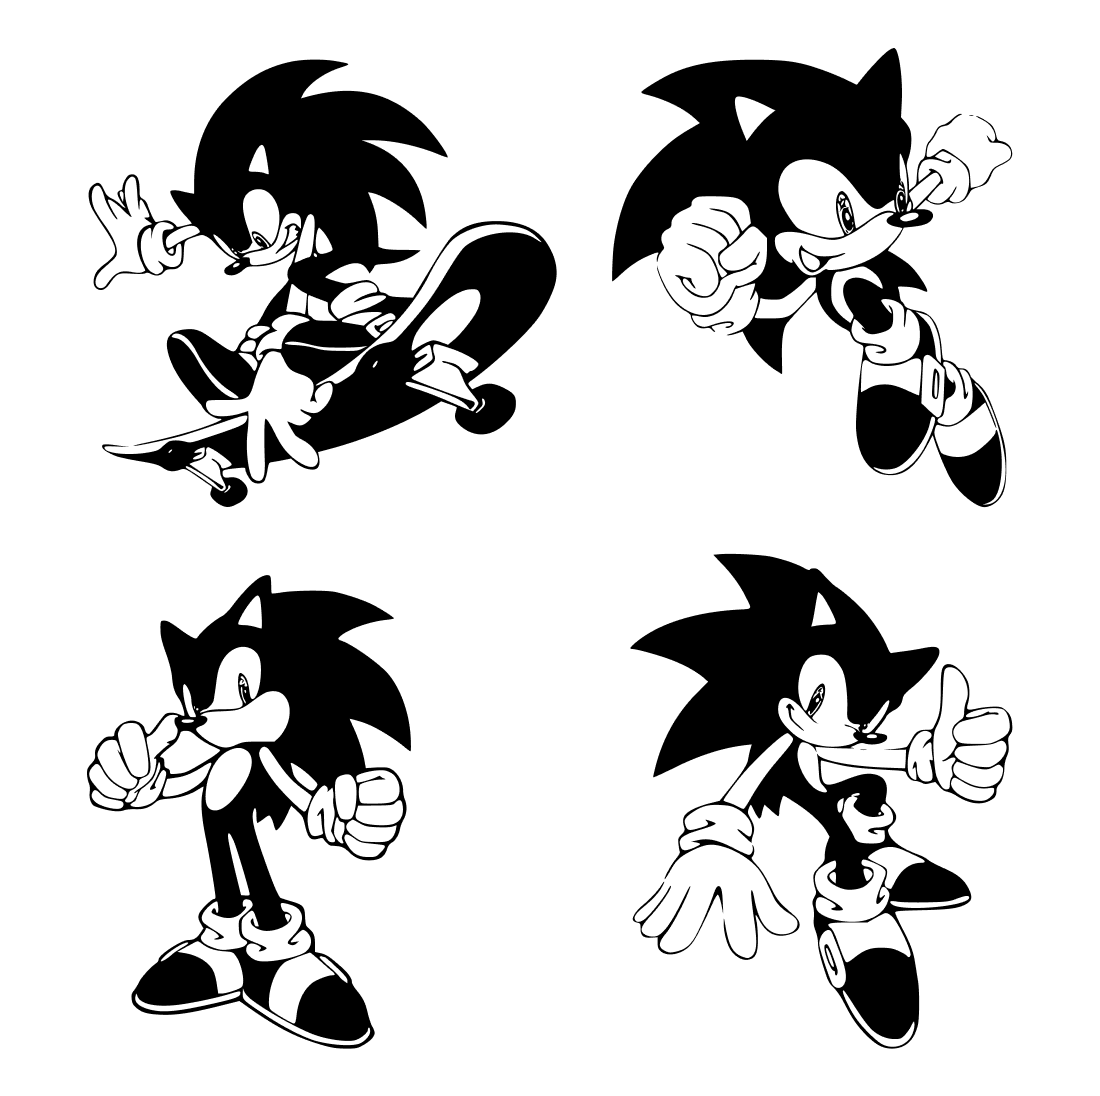 Black and white Sonic is actively having fun.